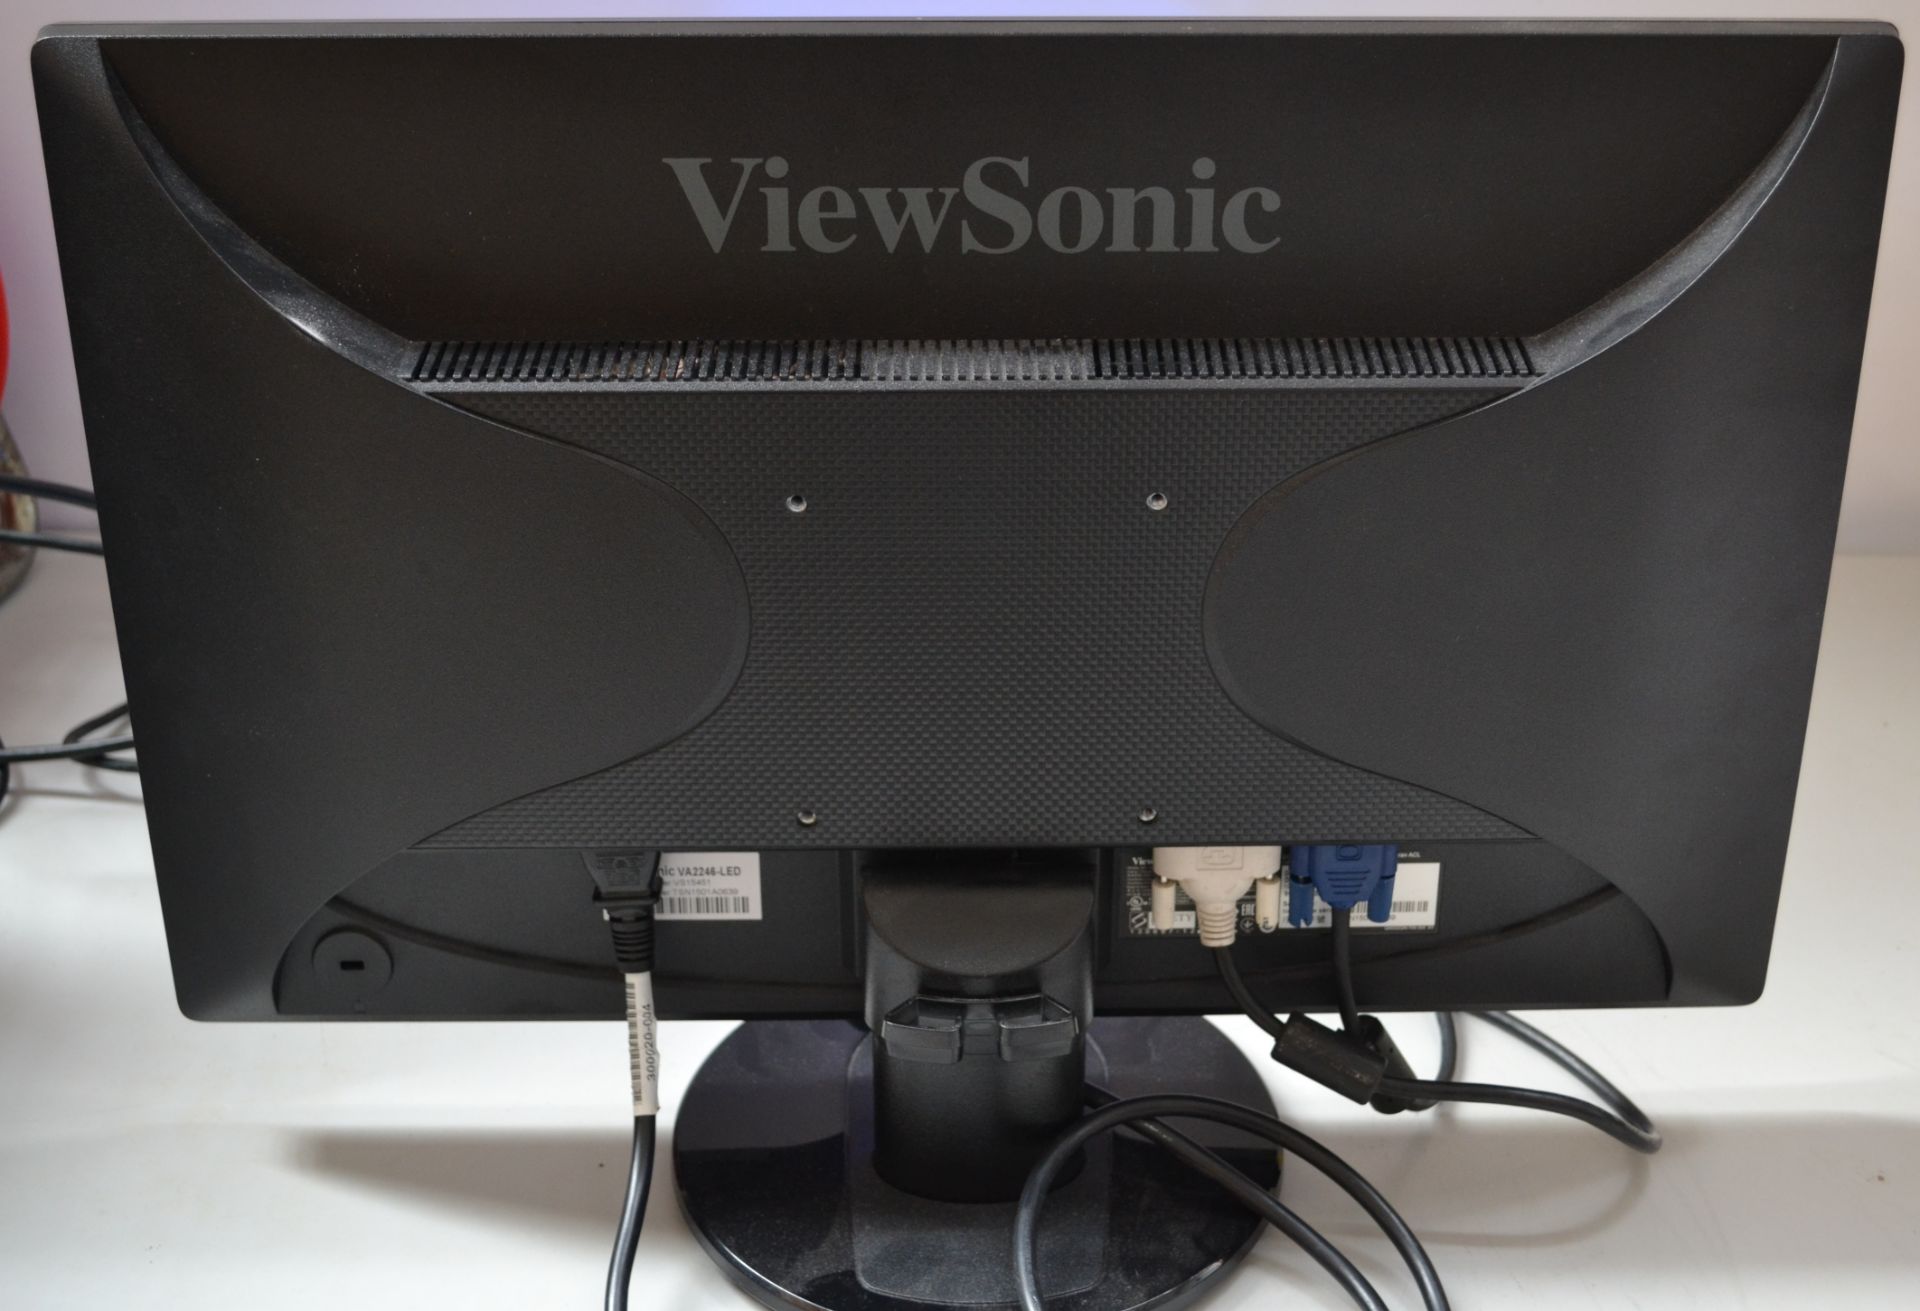 1 x View Sonic VA2246-LED 22" Widescreen PC Monitor - Ref J2215 - Image 2 of 3